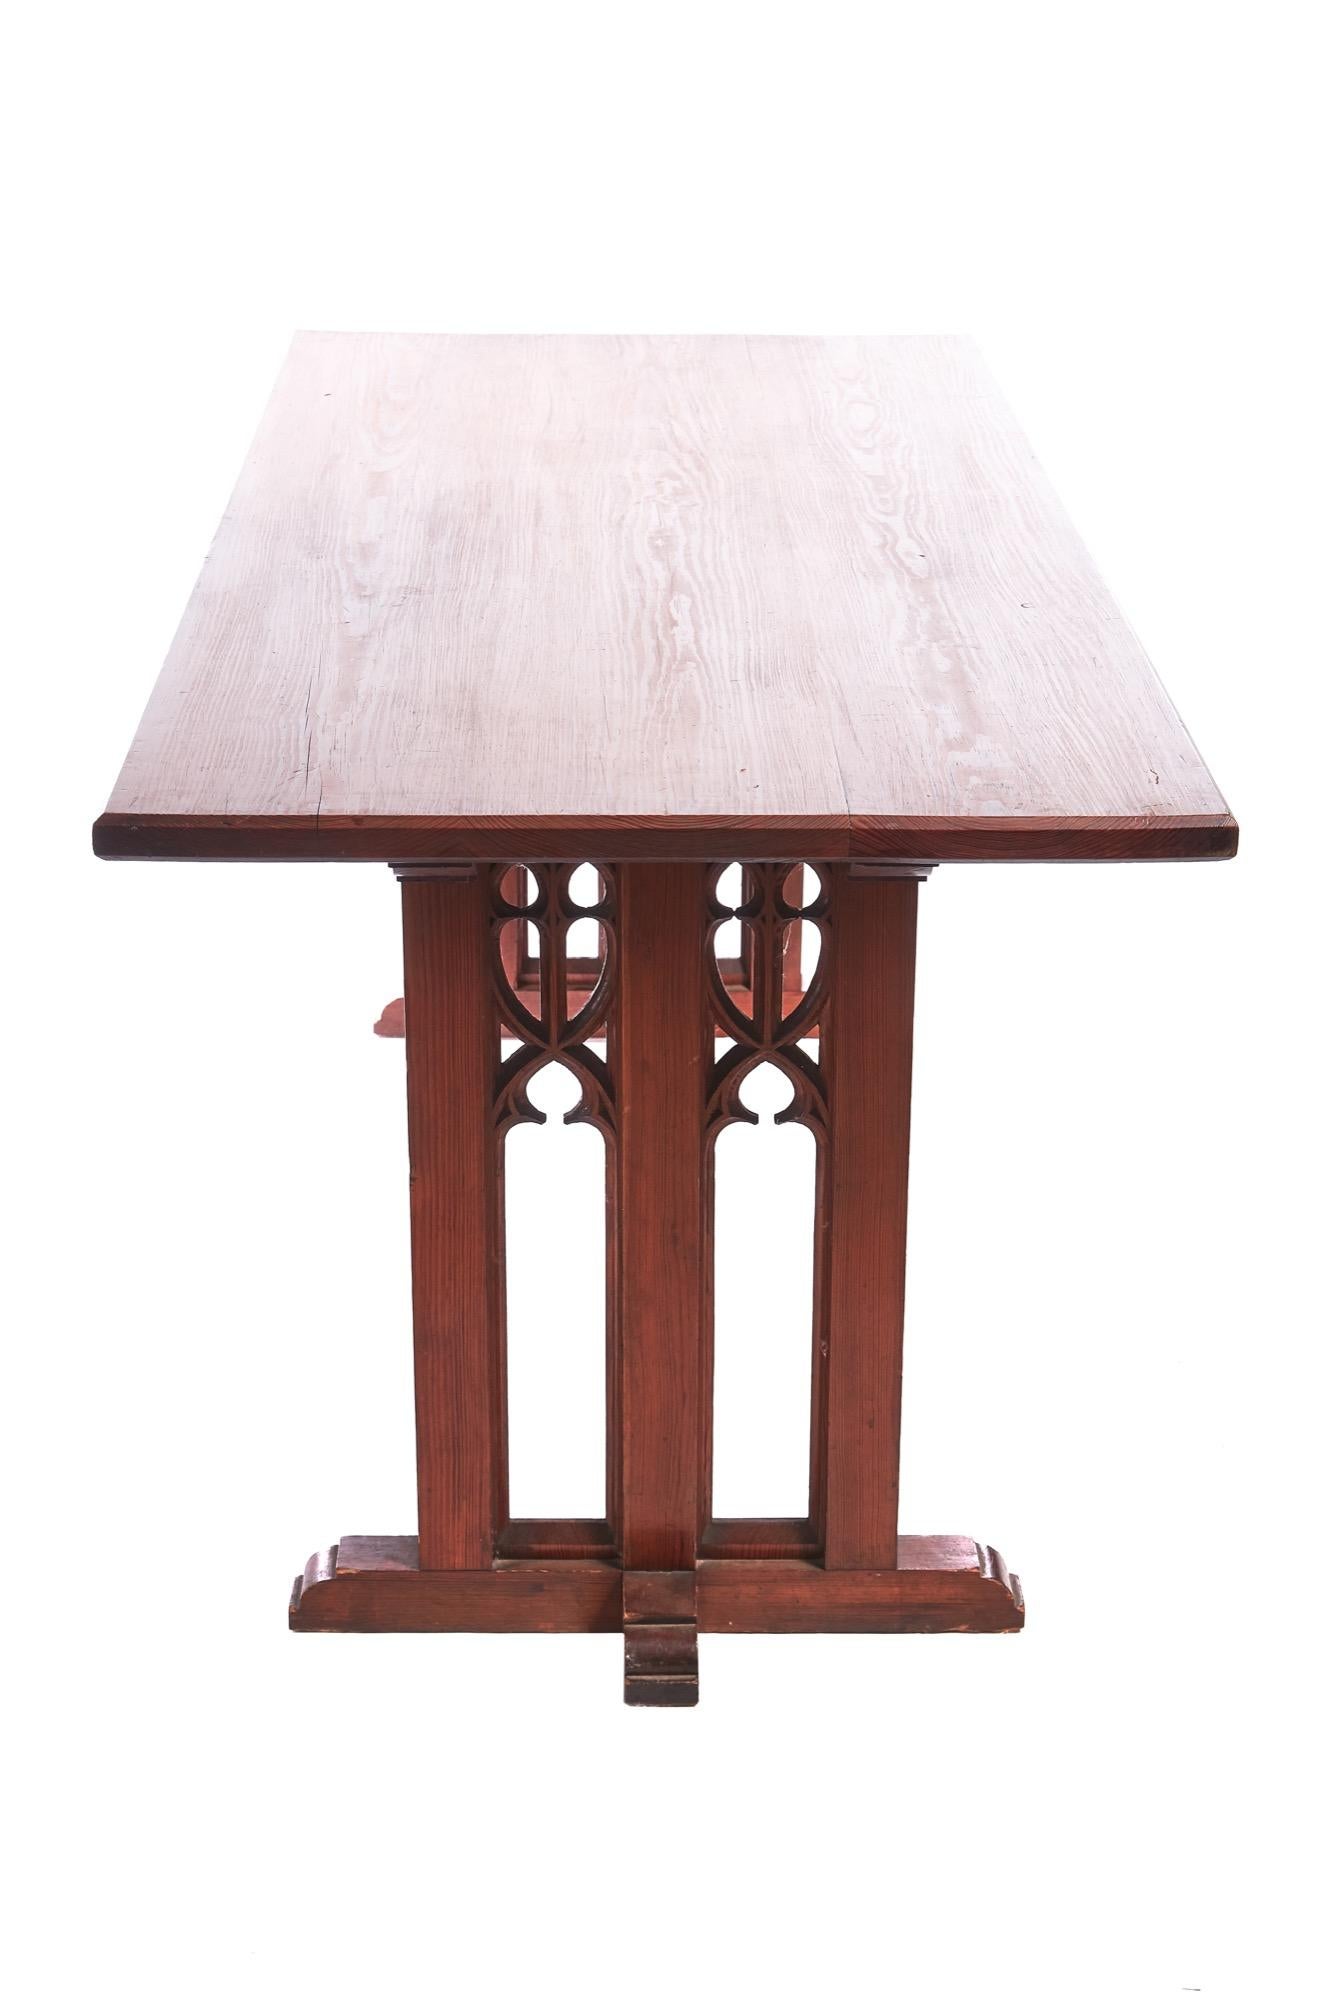 Fantastic Gothic Pitch Pine Alter Table 5